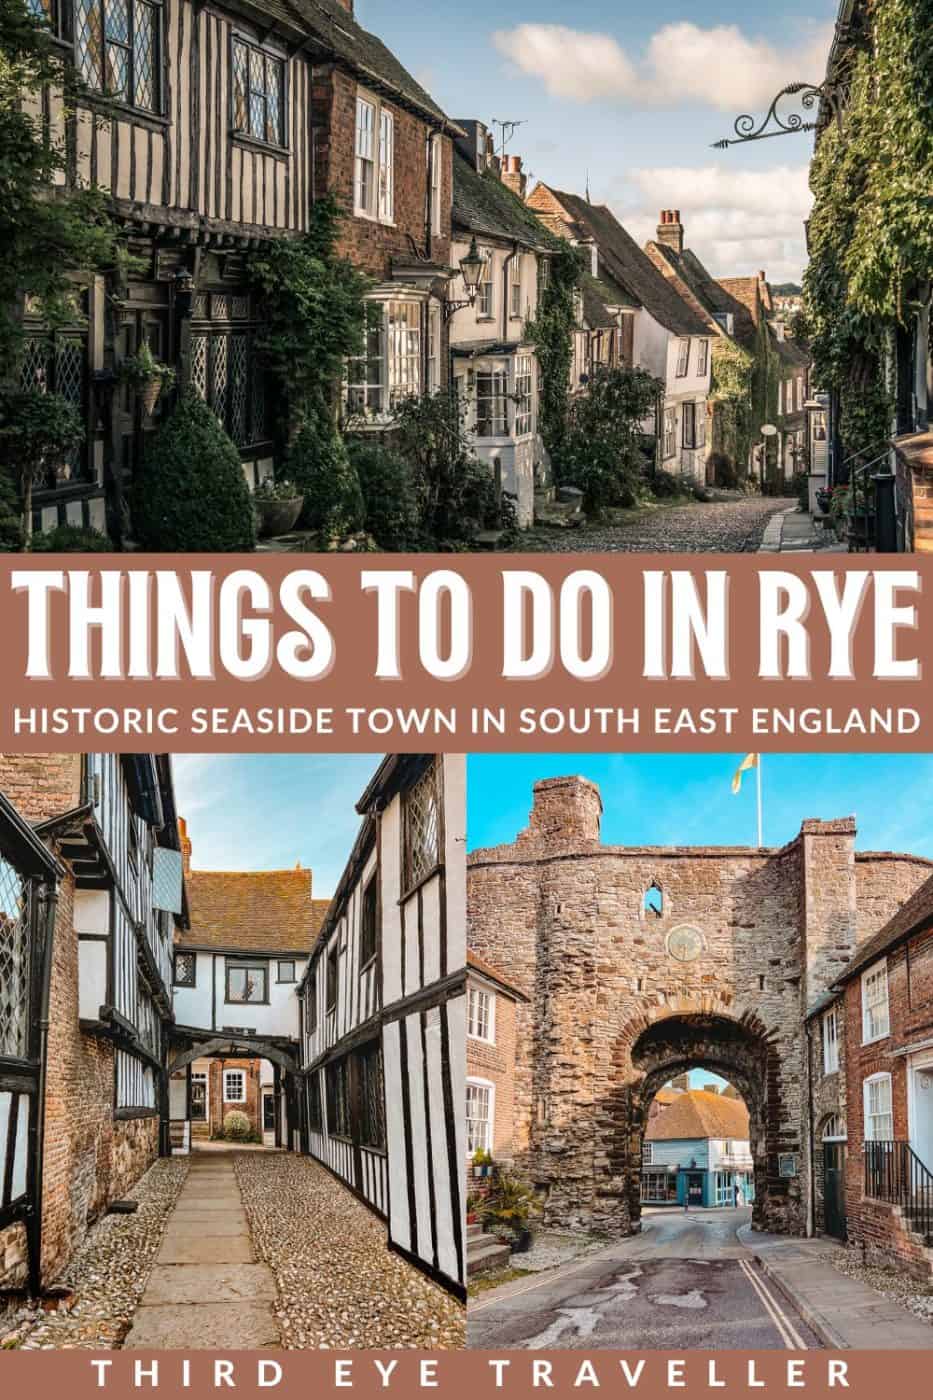 Things to do in Rye Sussex